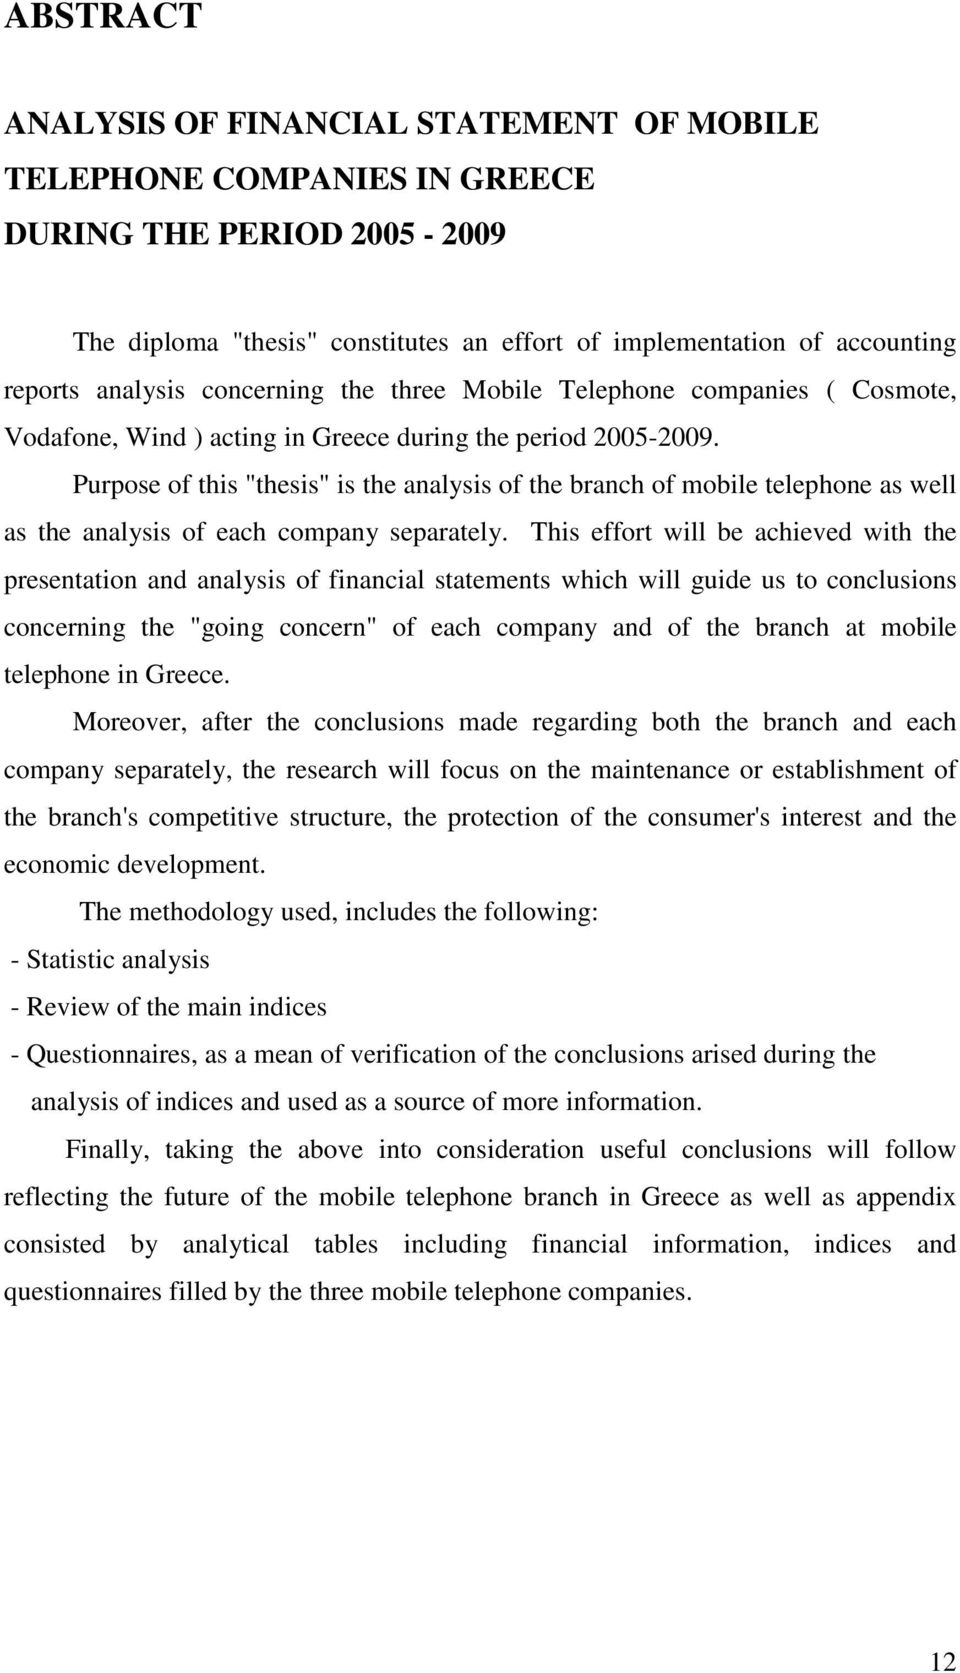 Purpose of this "thesis" is the analysis of the branch of mobile telephone as well as the analysis of each company separately.